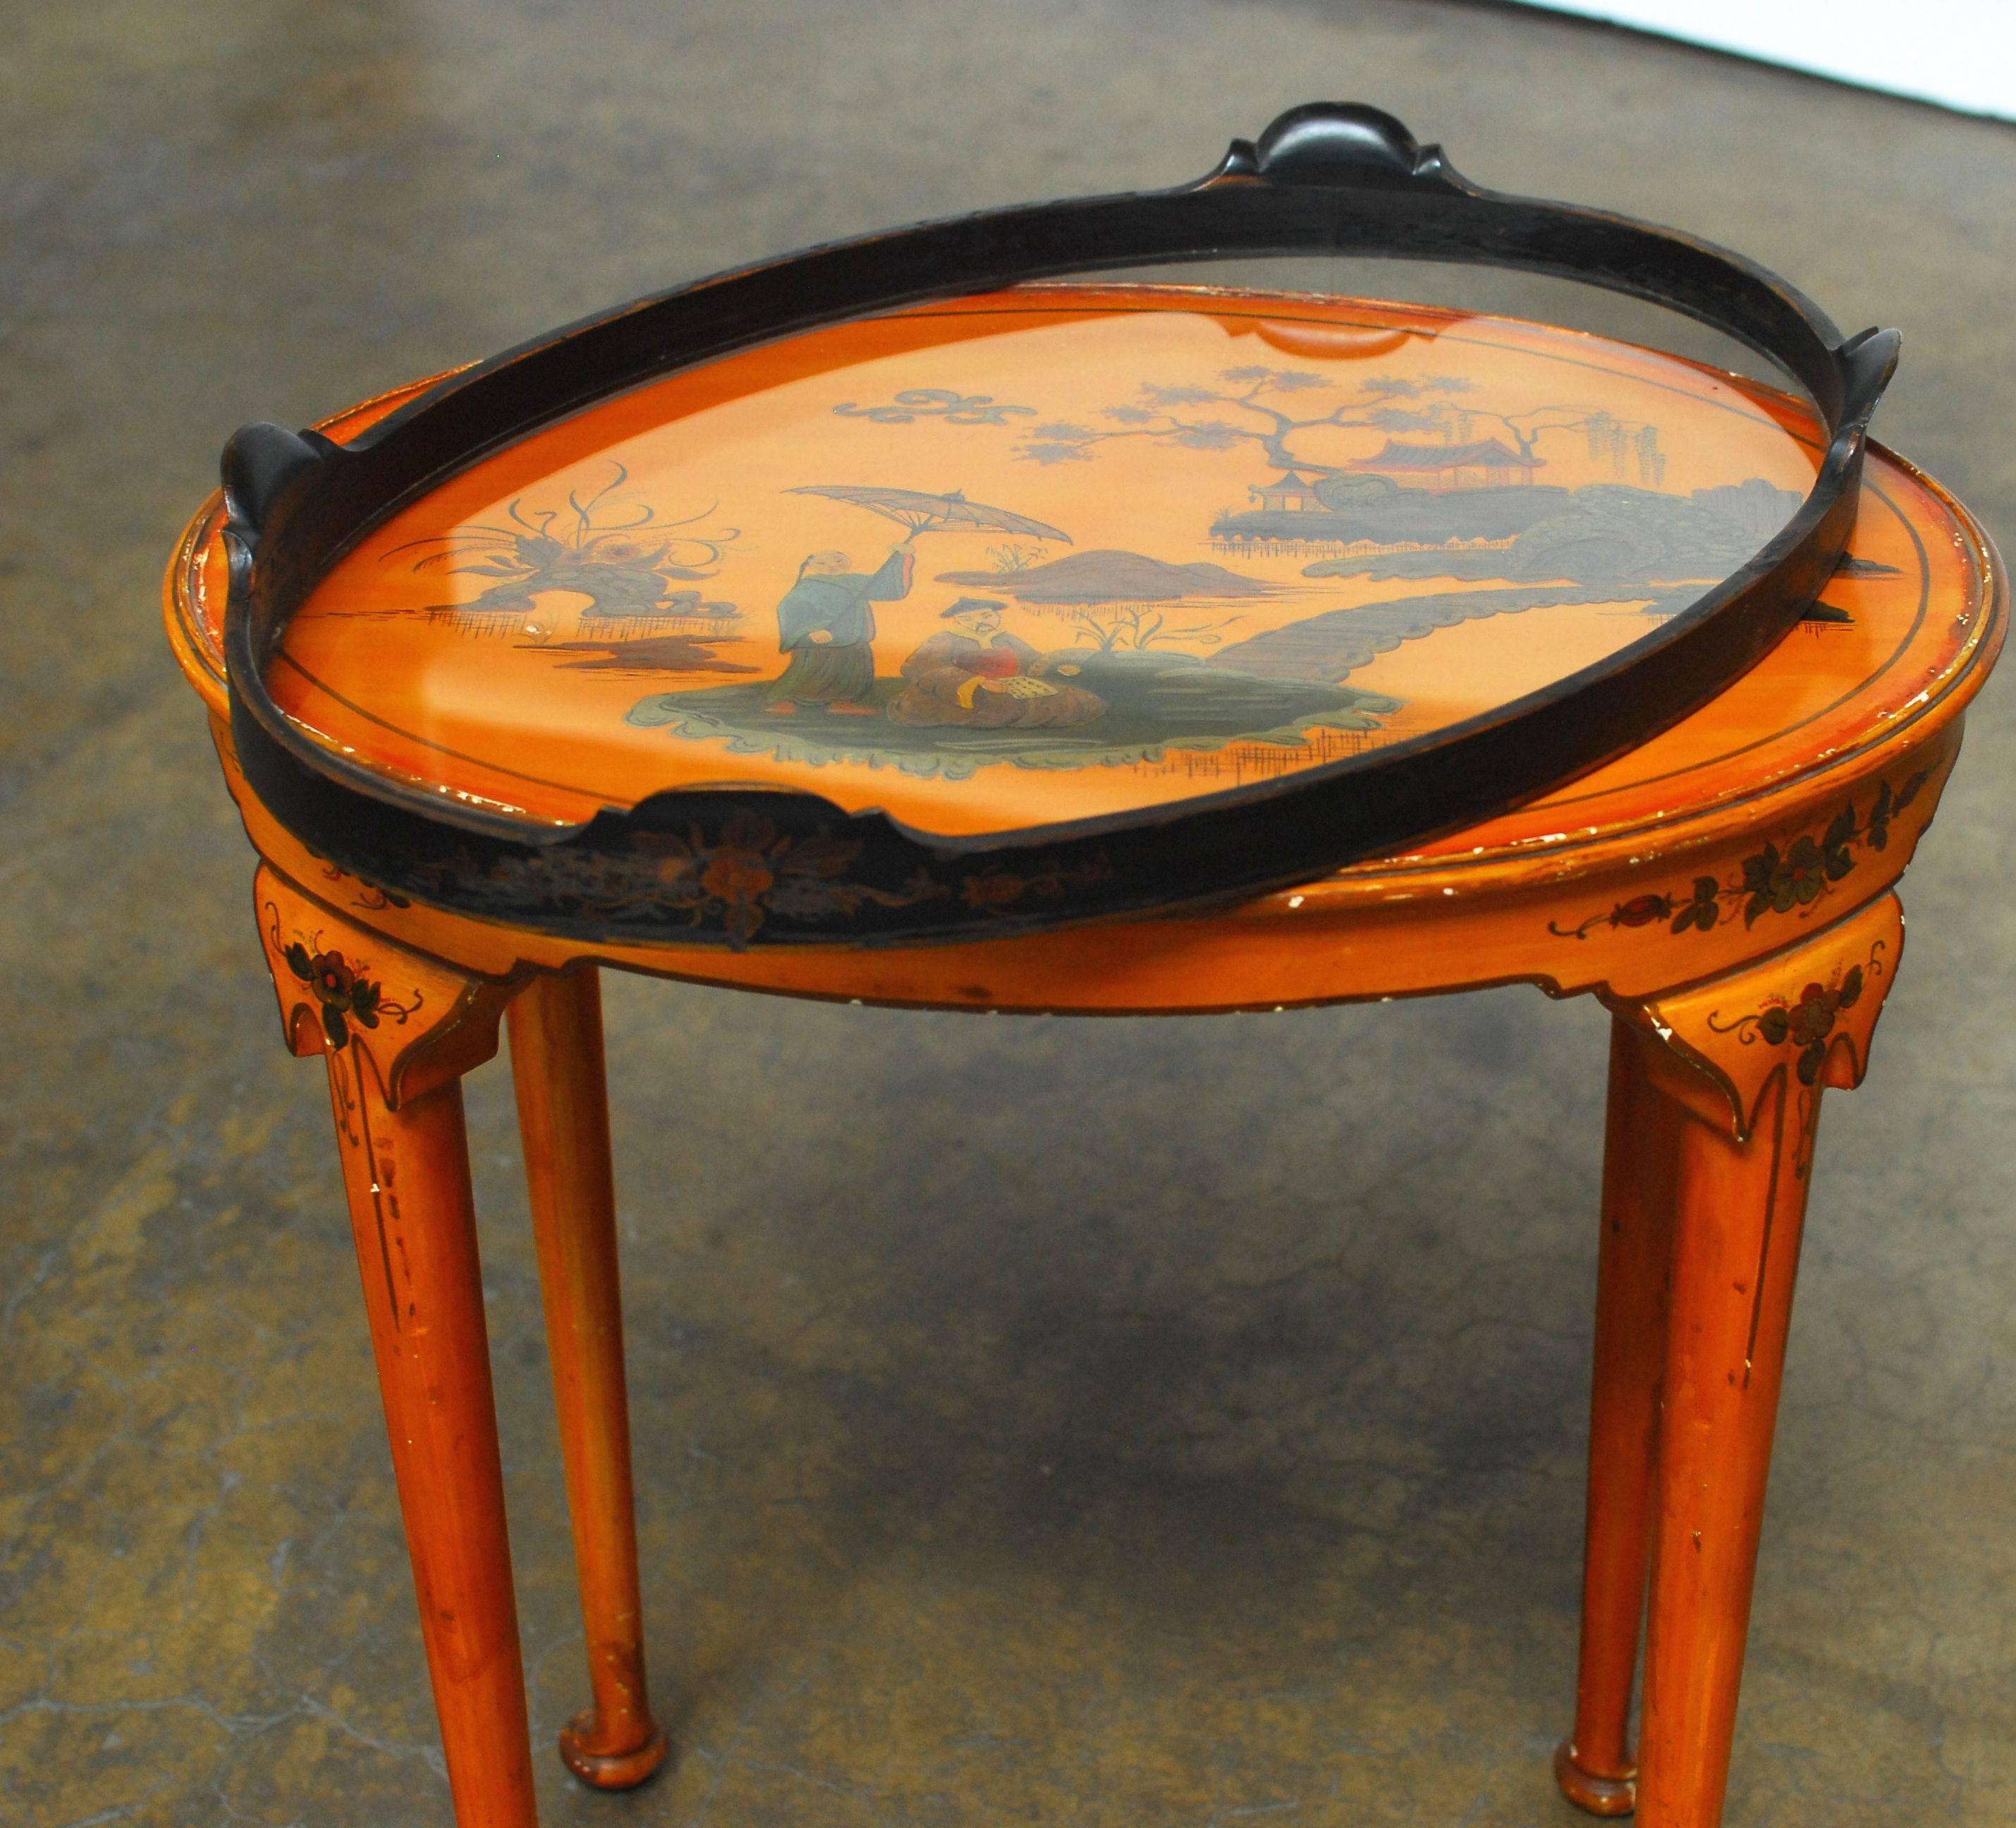 Queen Anne Style Chinoiserie Tea Table In Excellent Condition For Sale In Rio Vista, CA